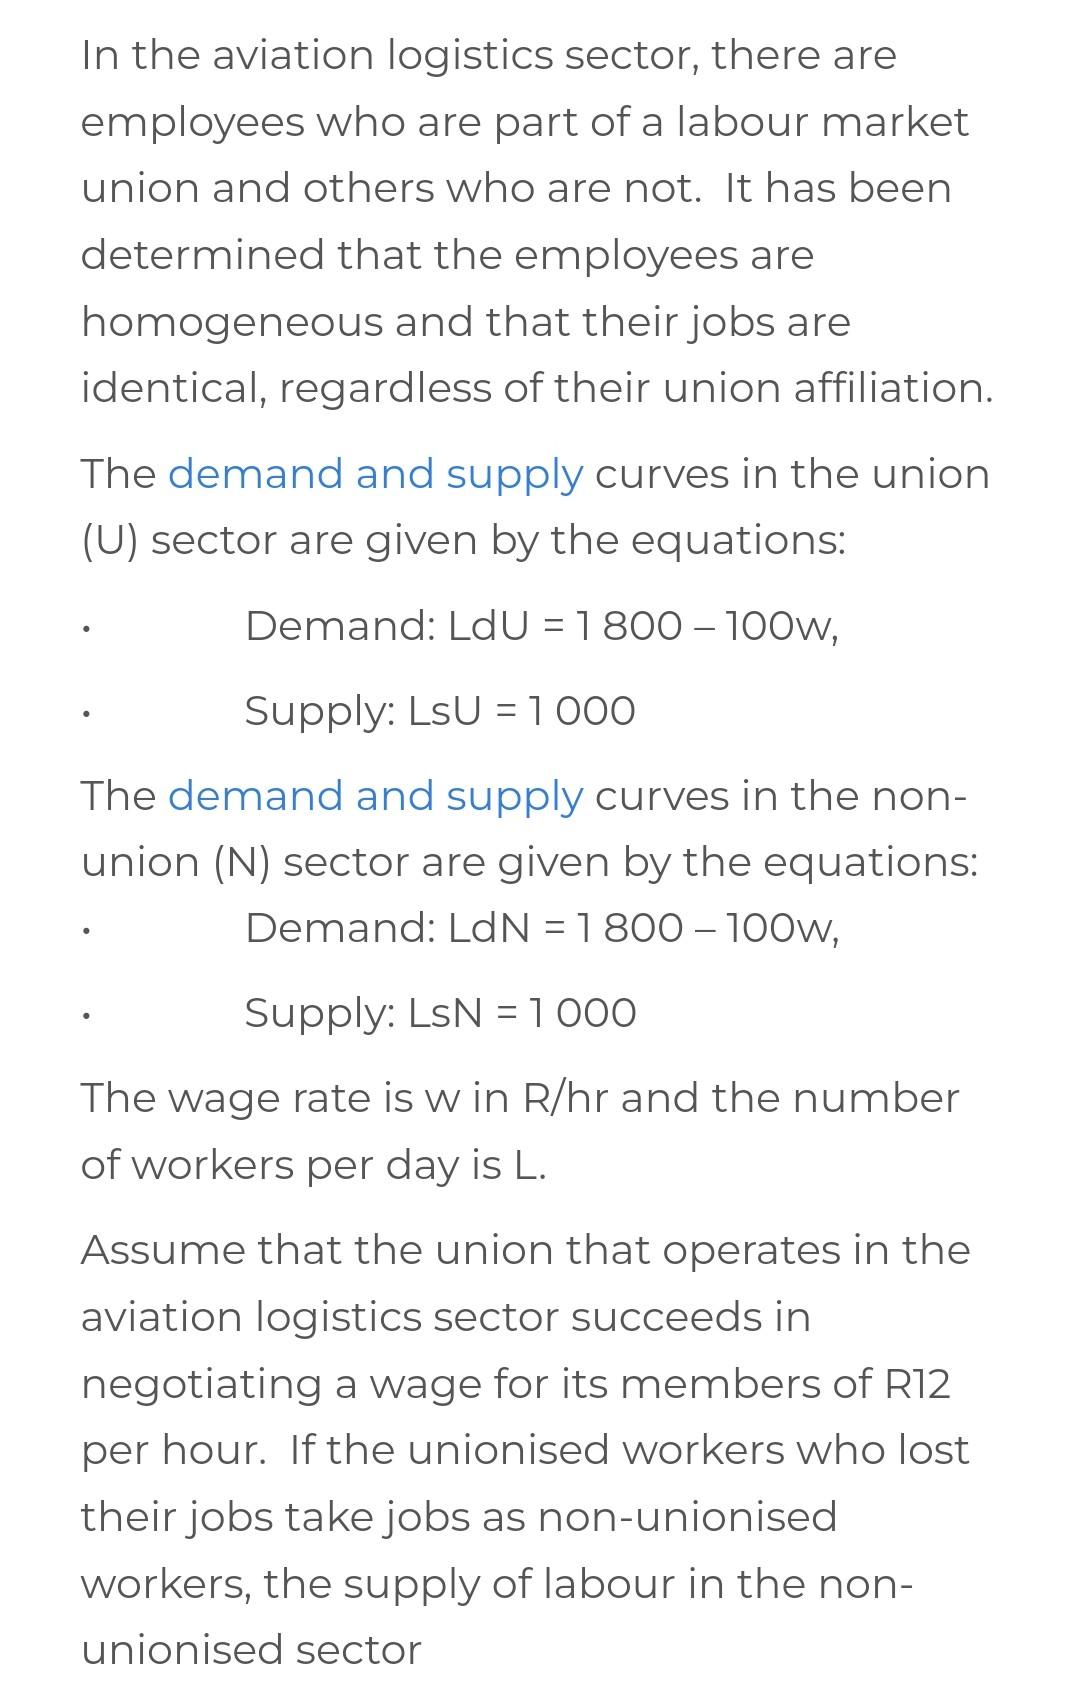 In the aviation logistics sector, there are employees who are part of a labour market union and others who are not. It has be